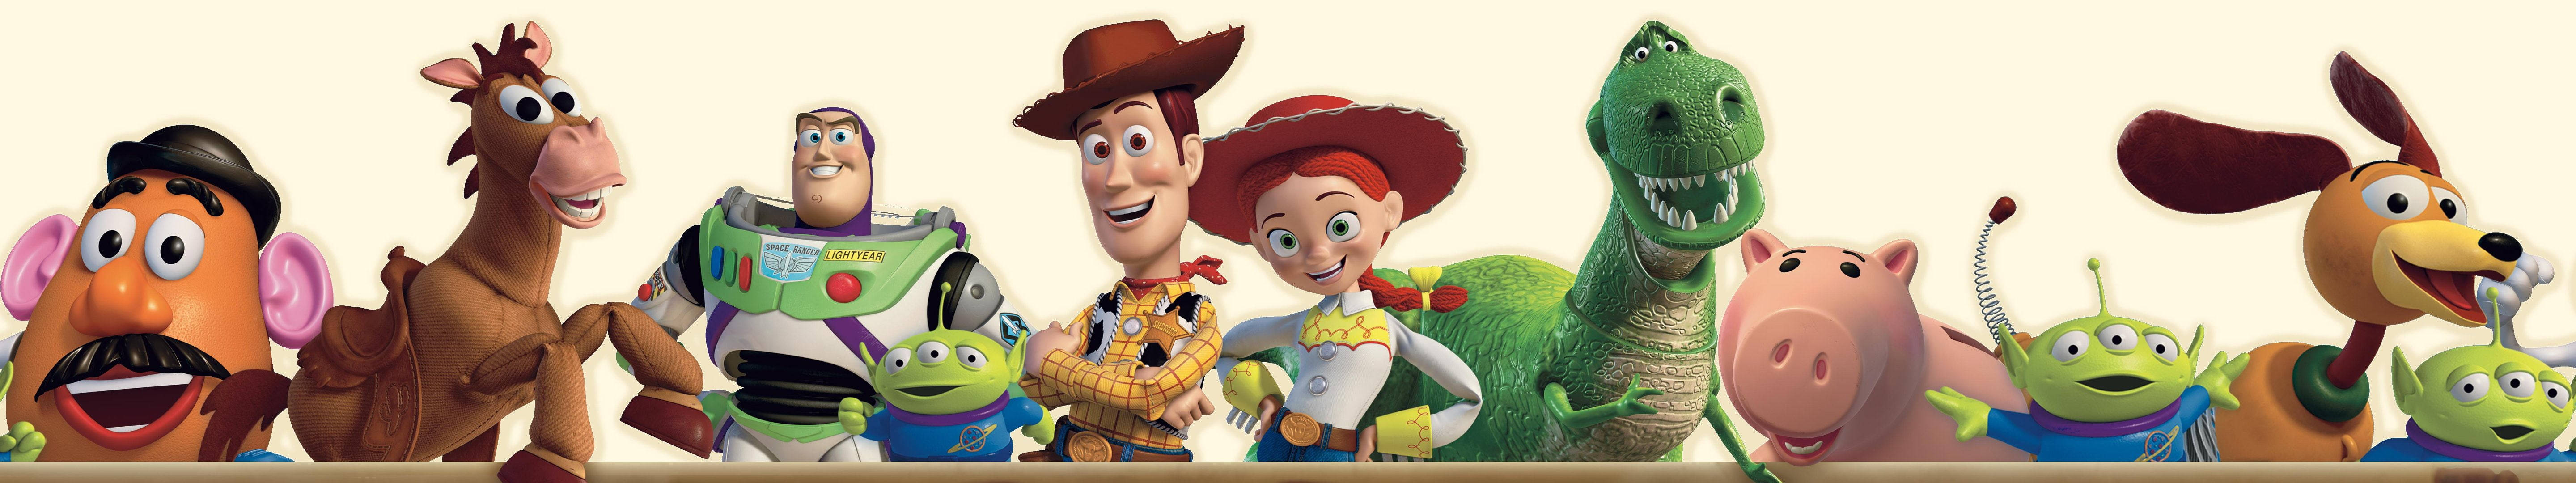 3monitore Toy Story Wallpaper